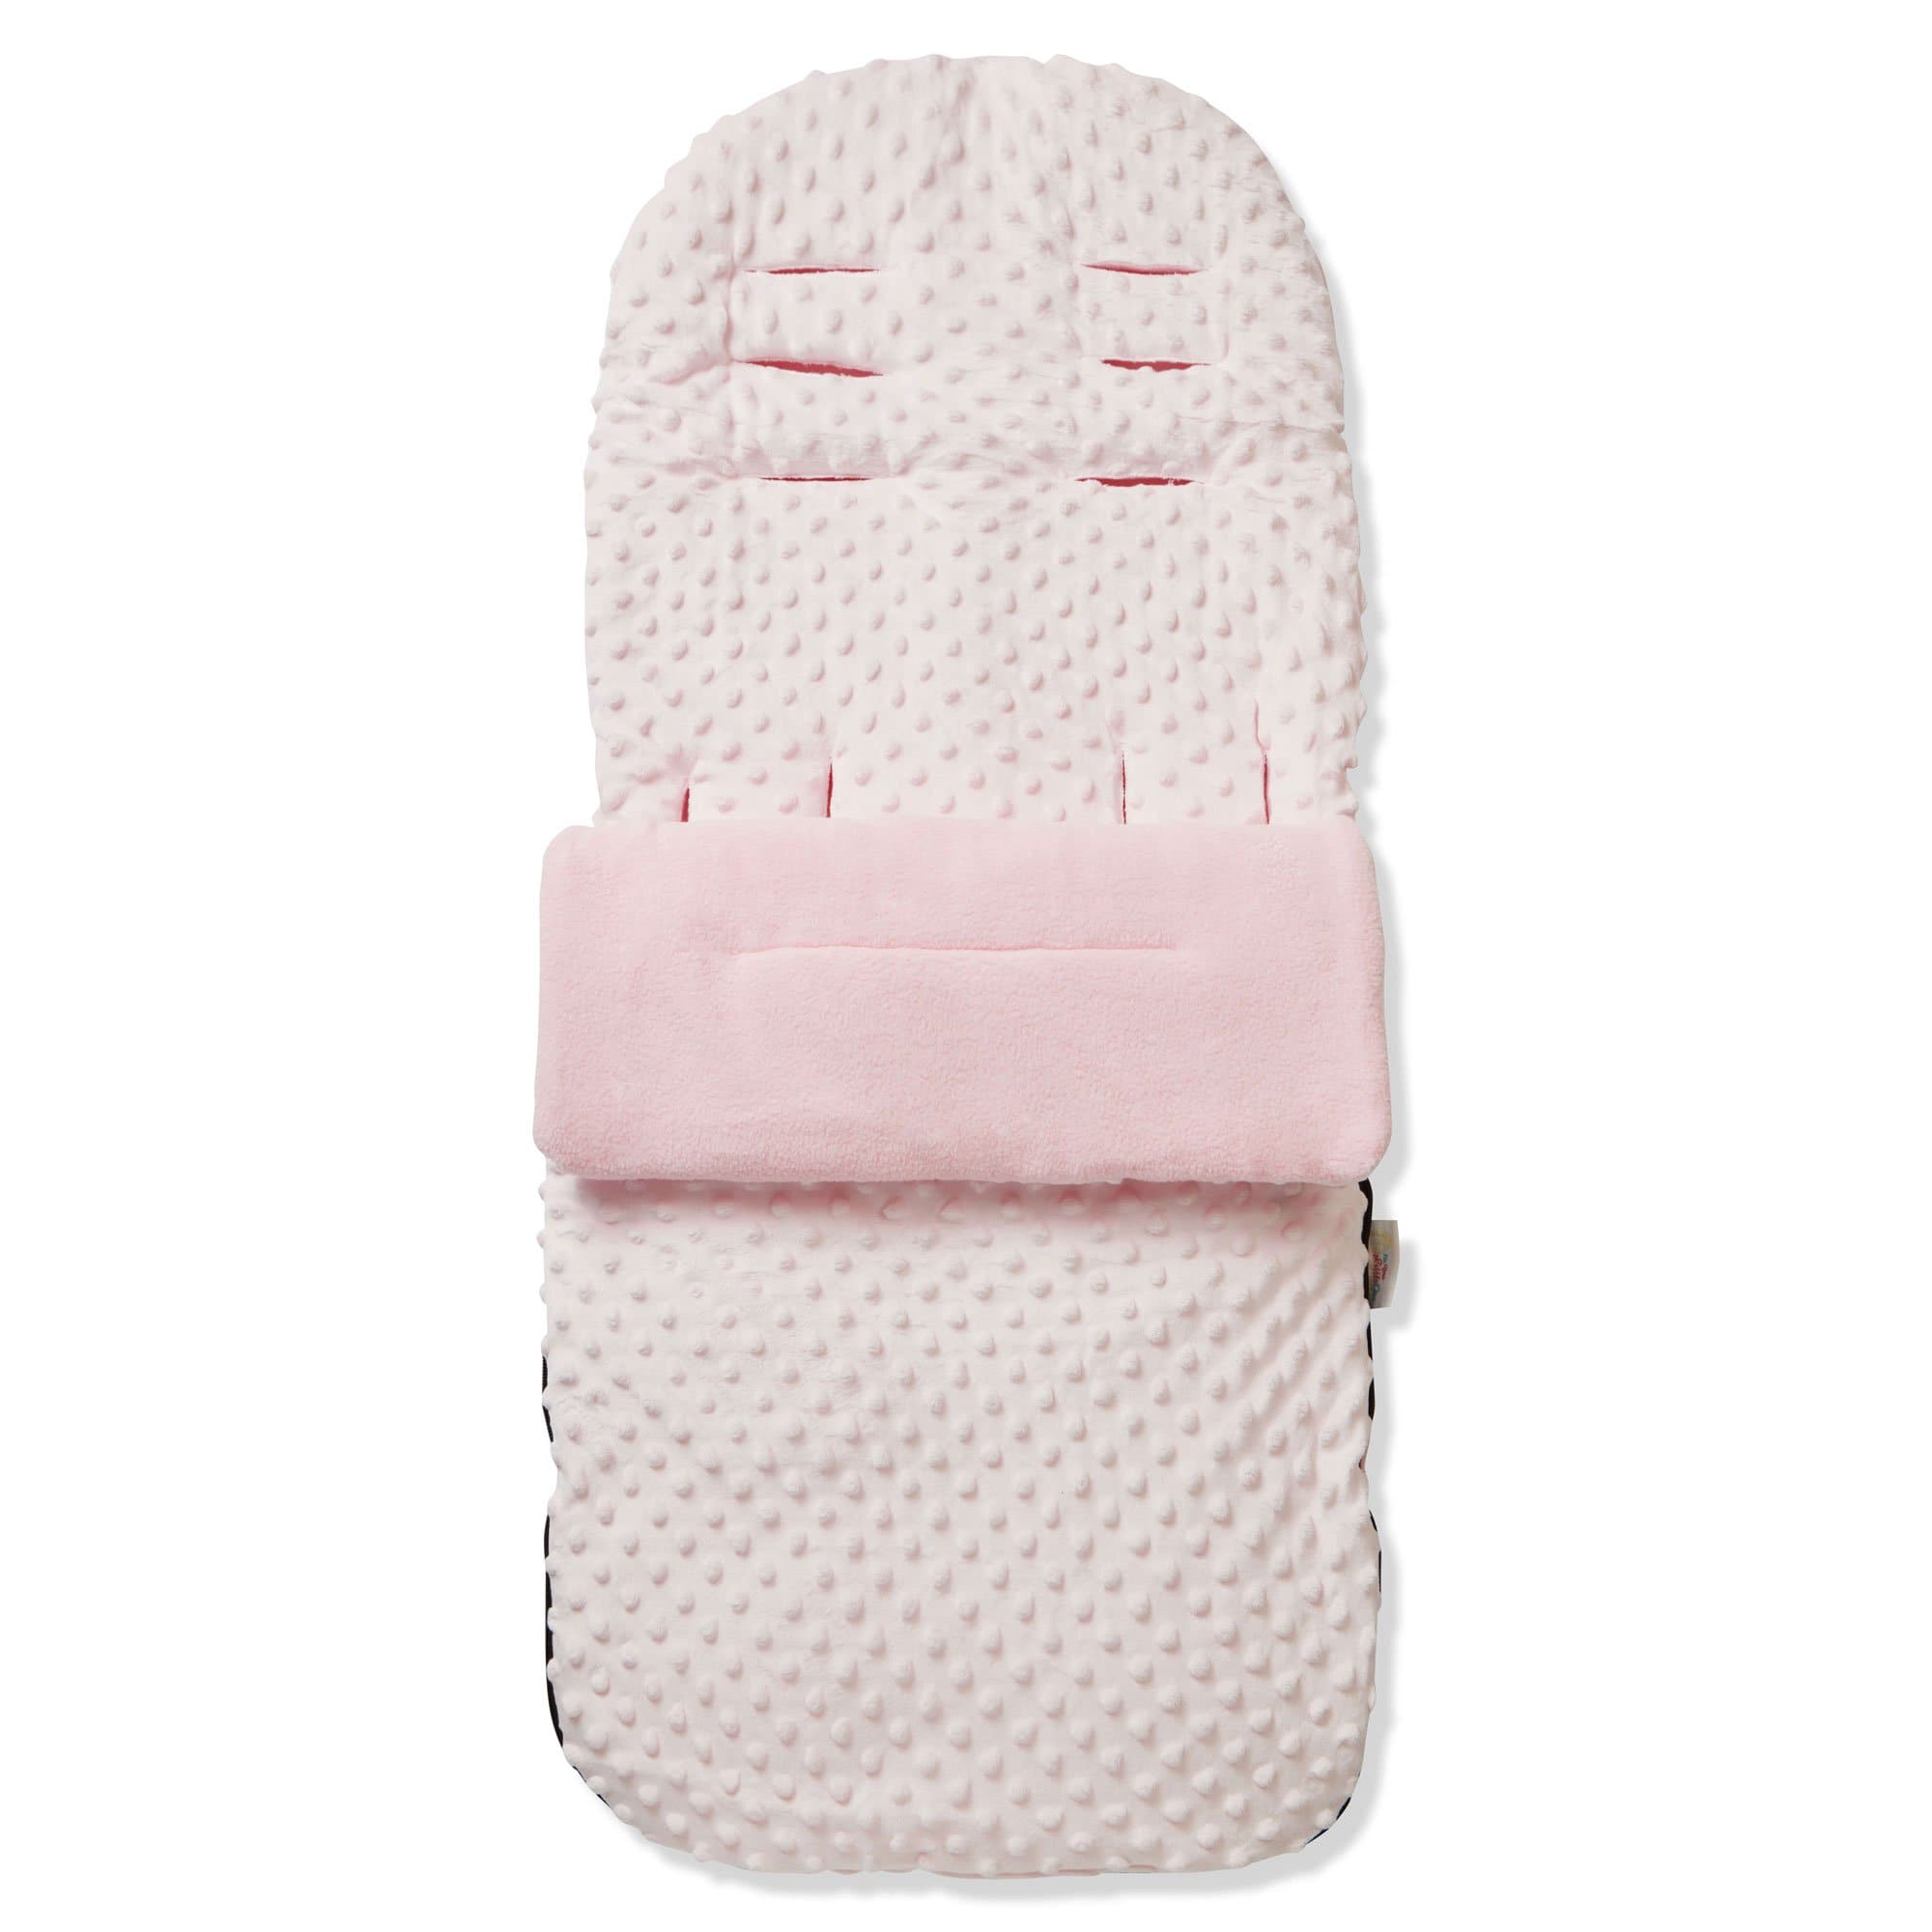 Dimple Footmuff / Cosy Toes Compatible with Cam - Pink / Fits All Models | For Your Little One